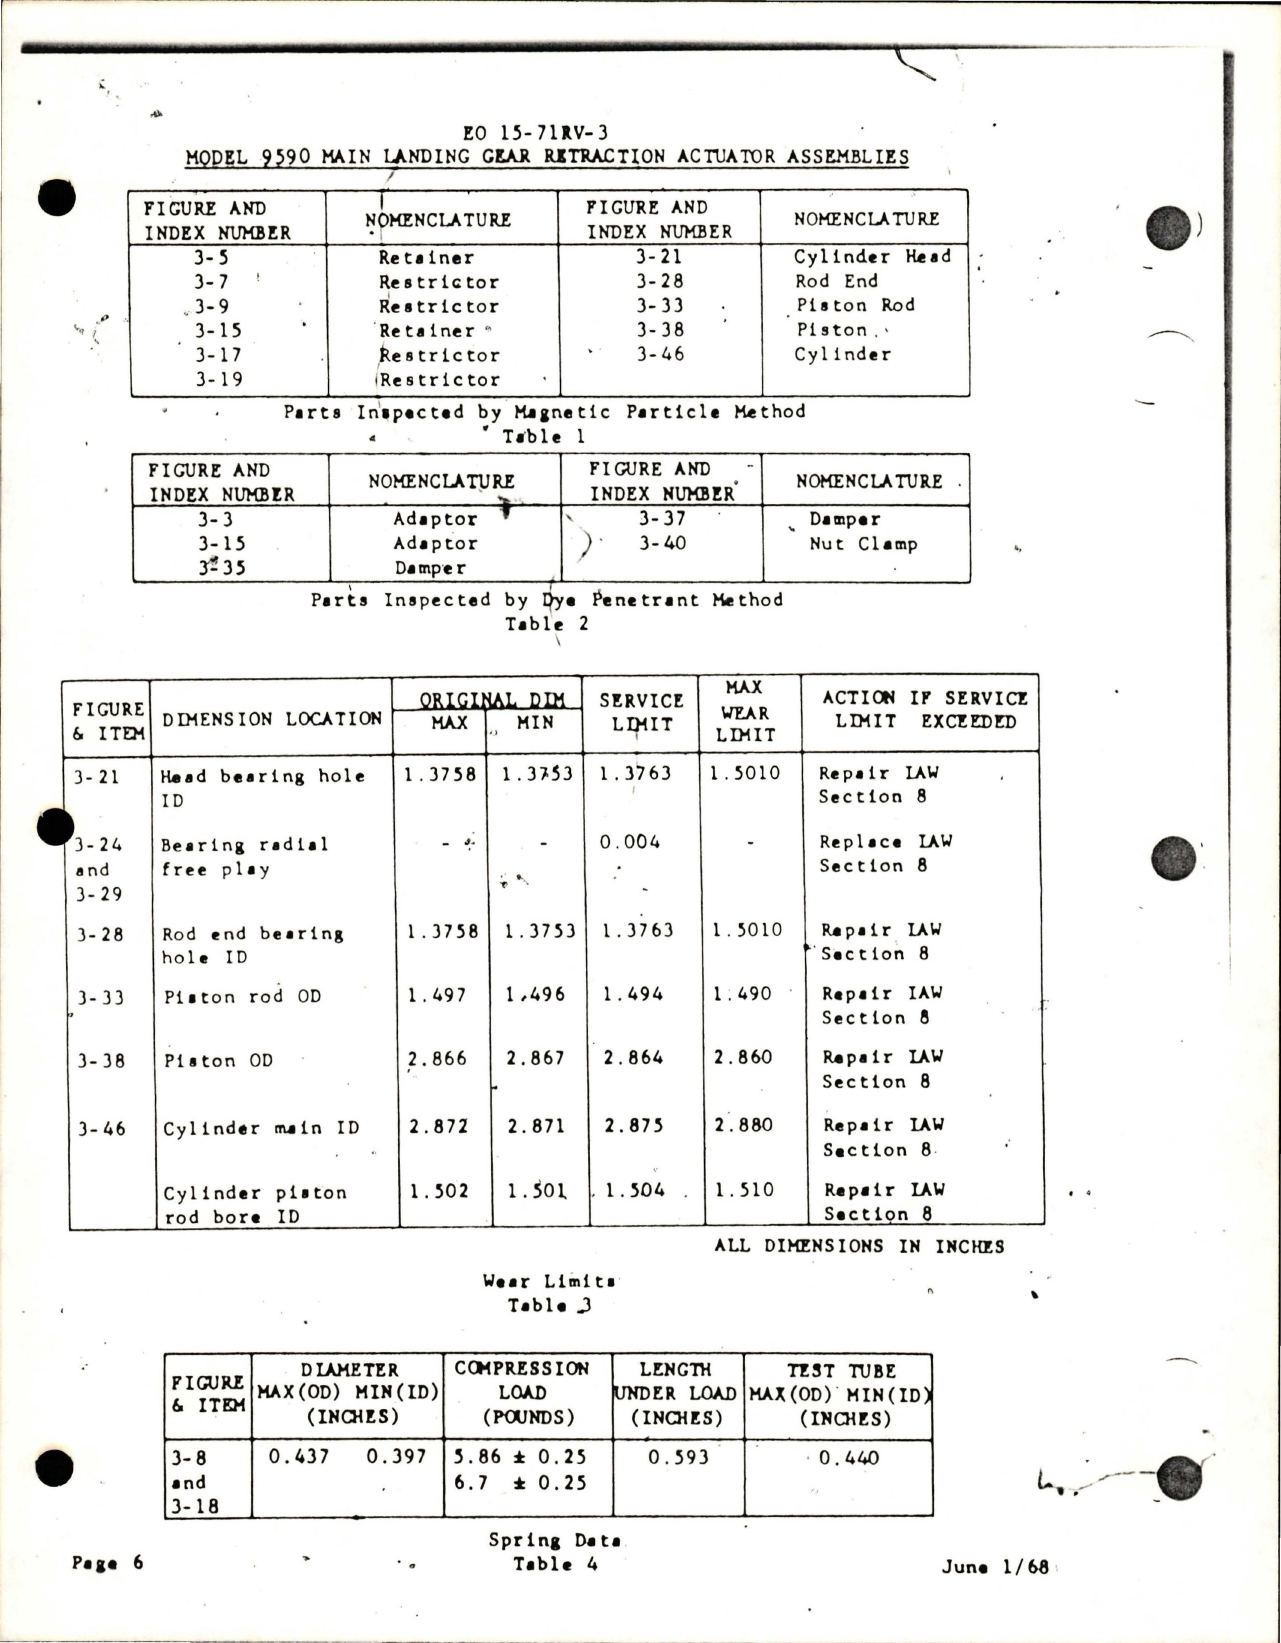 Sample page 9 from AirCorps Library document: Handbook with Parts List for Main Landing Gear Retraction Actuator Assemblies - Parts 9590-1 and 9590-3